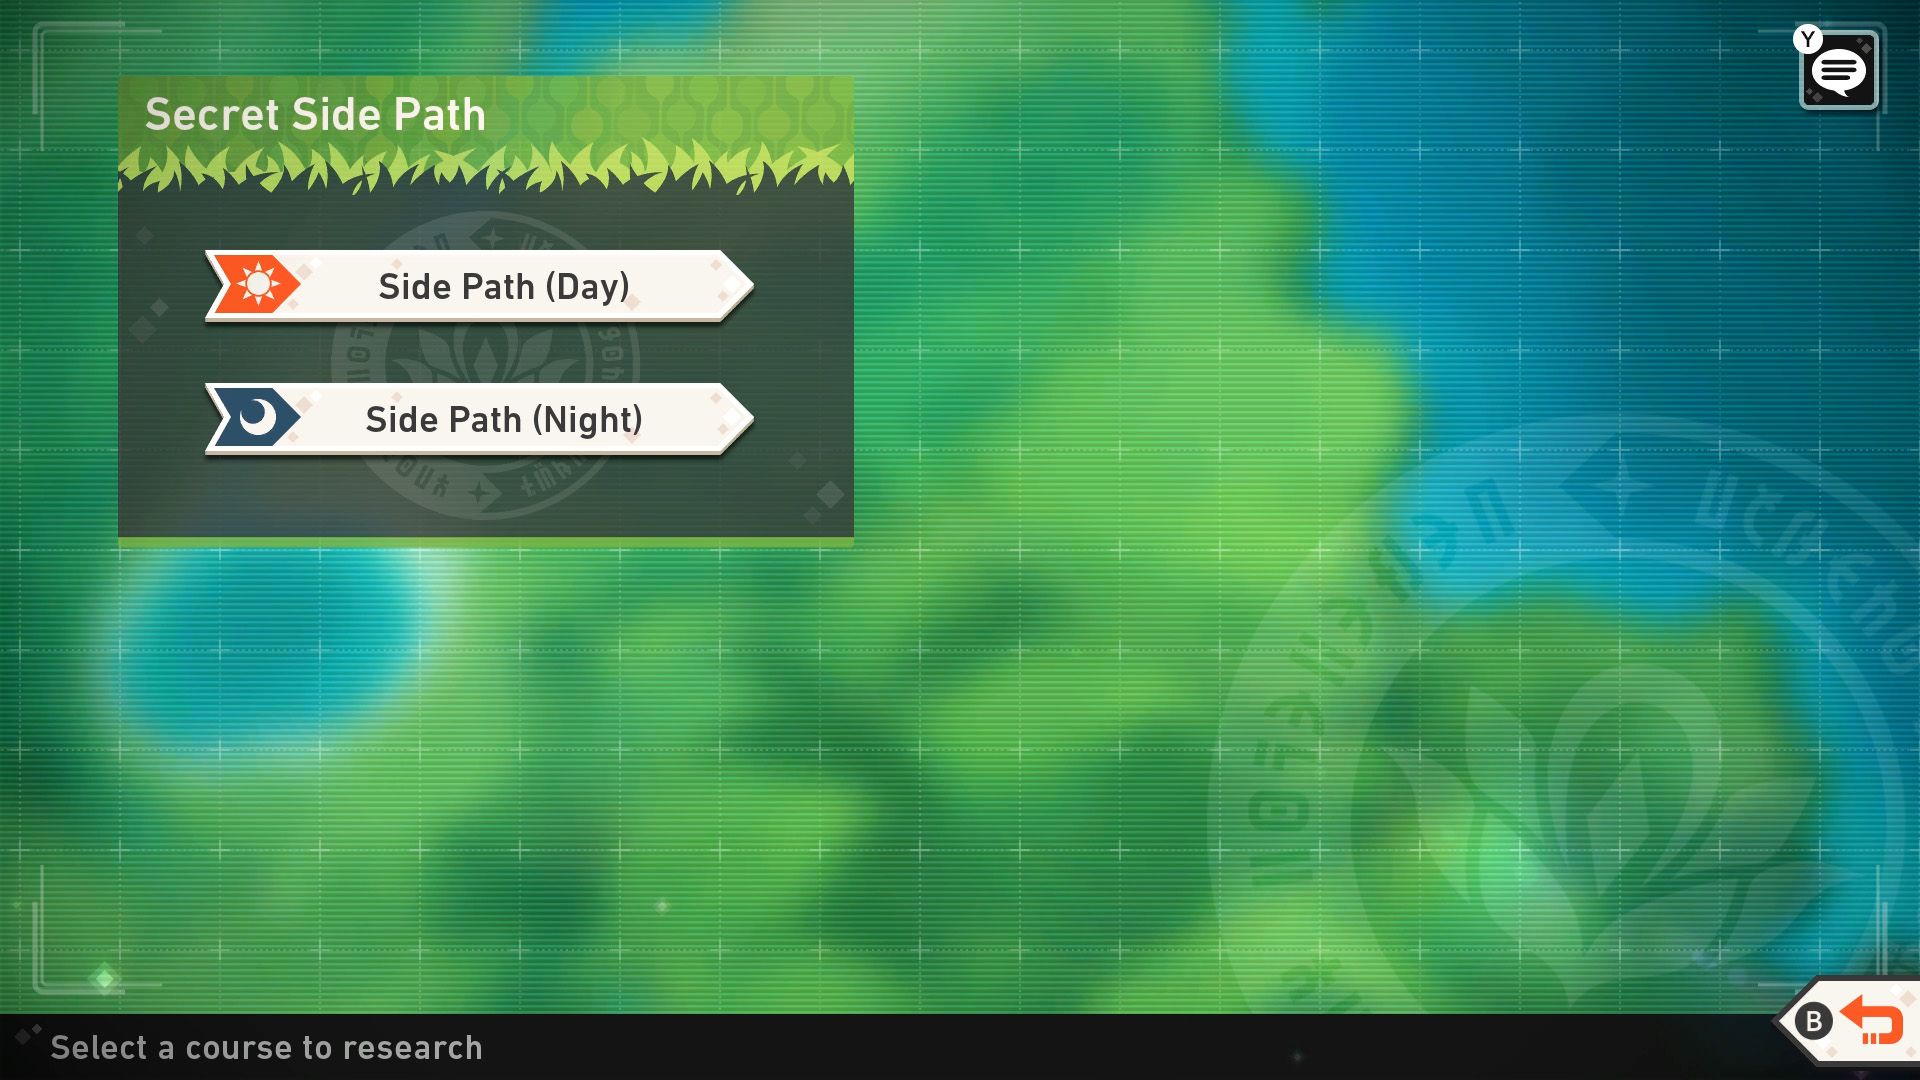 The Secret Side Path course select screen in New Pokemon Snap